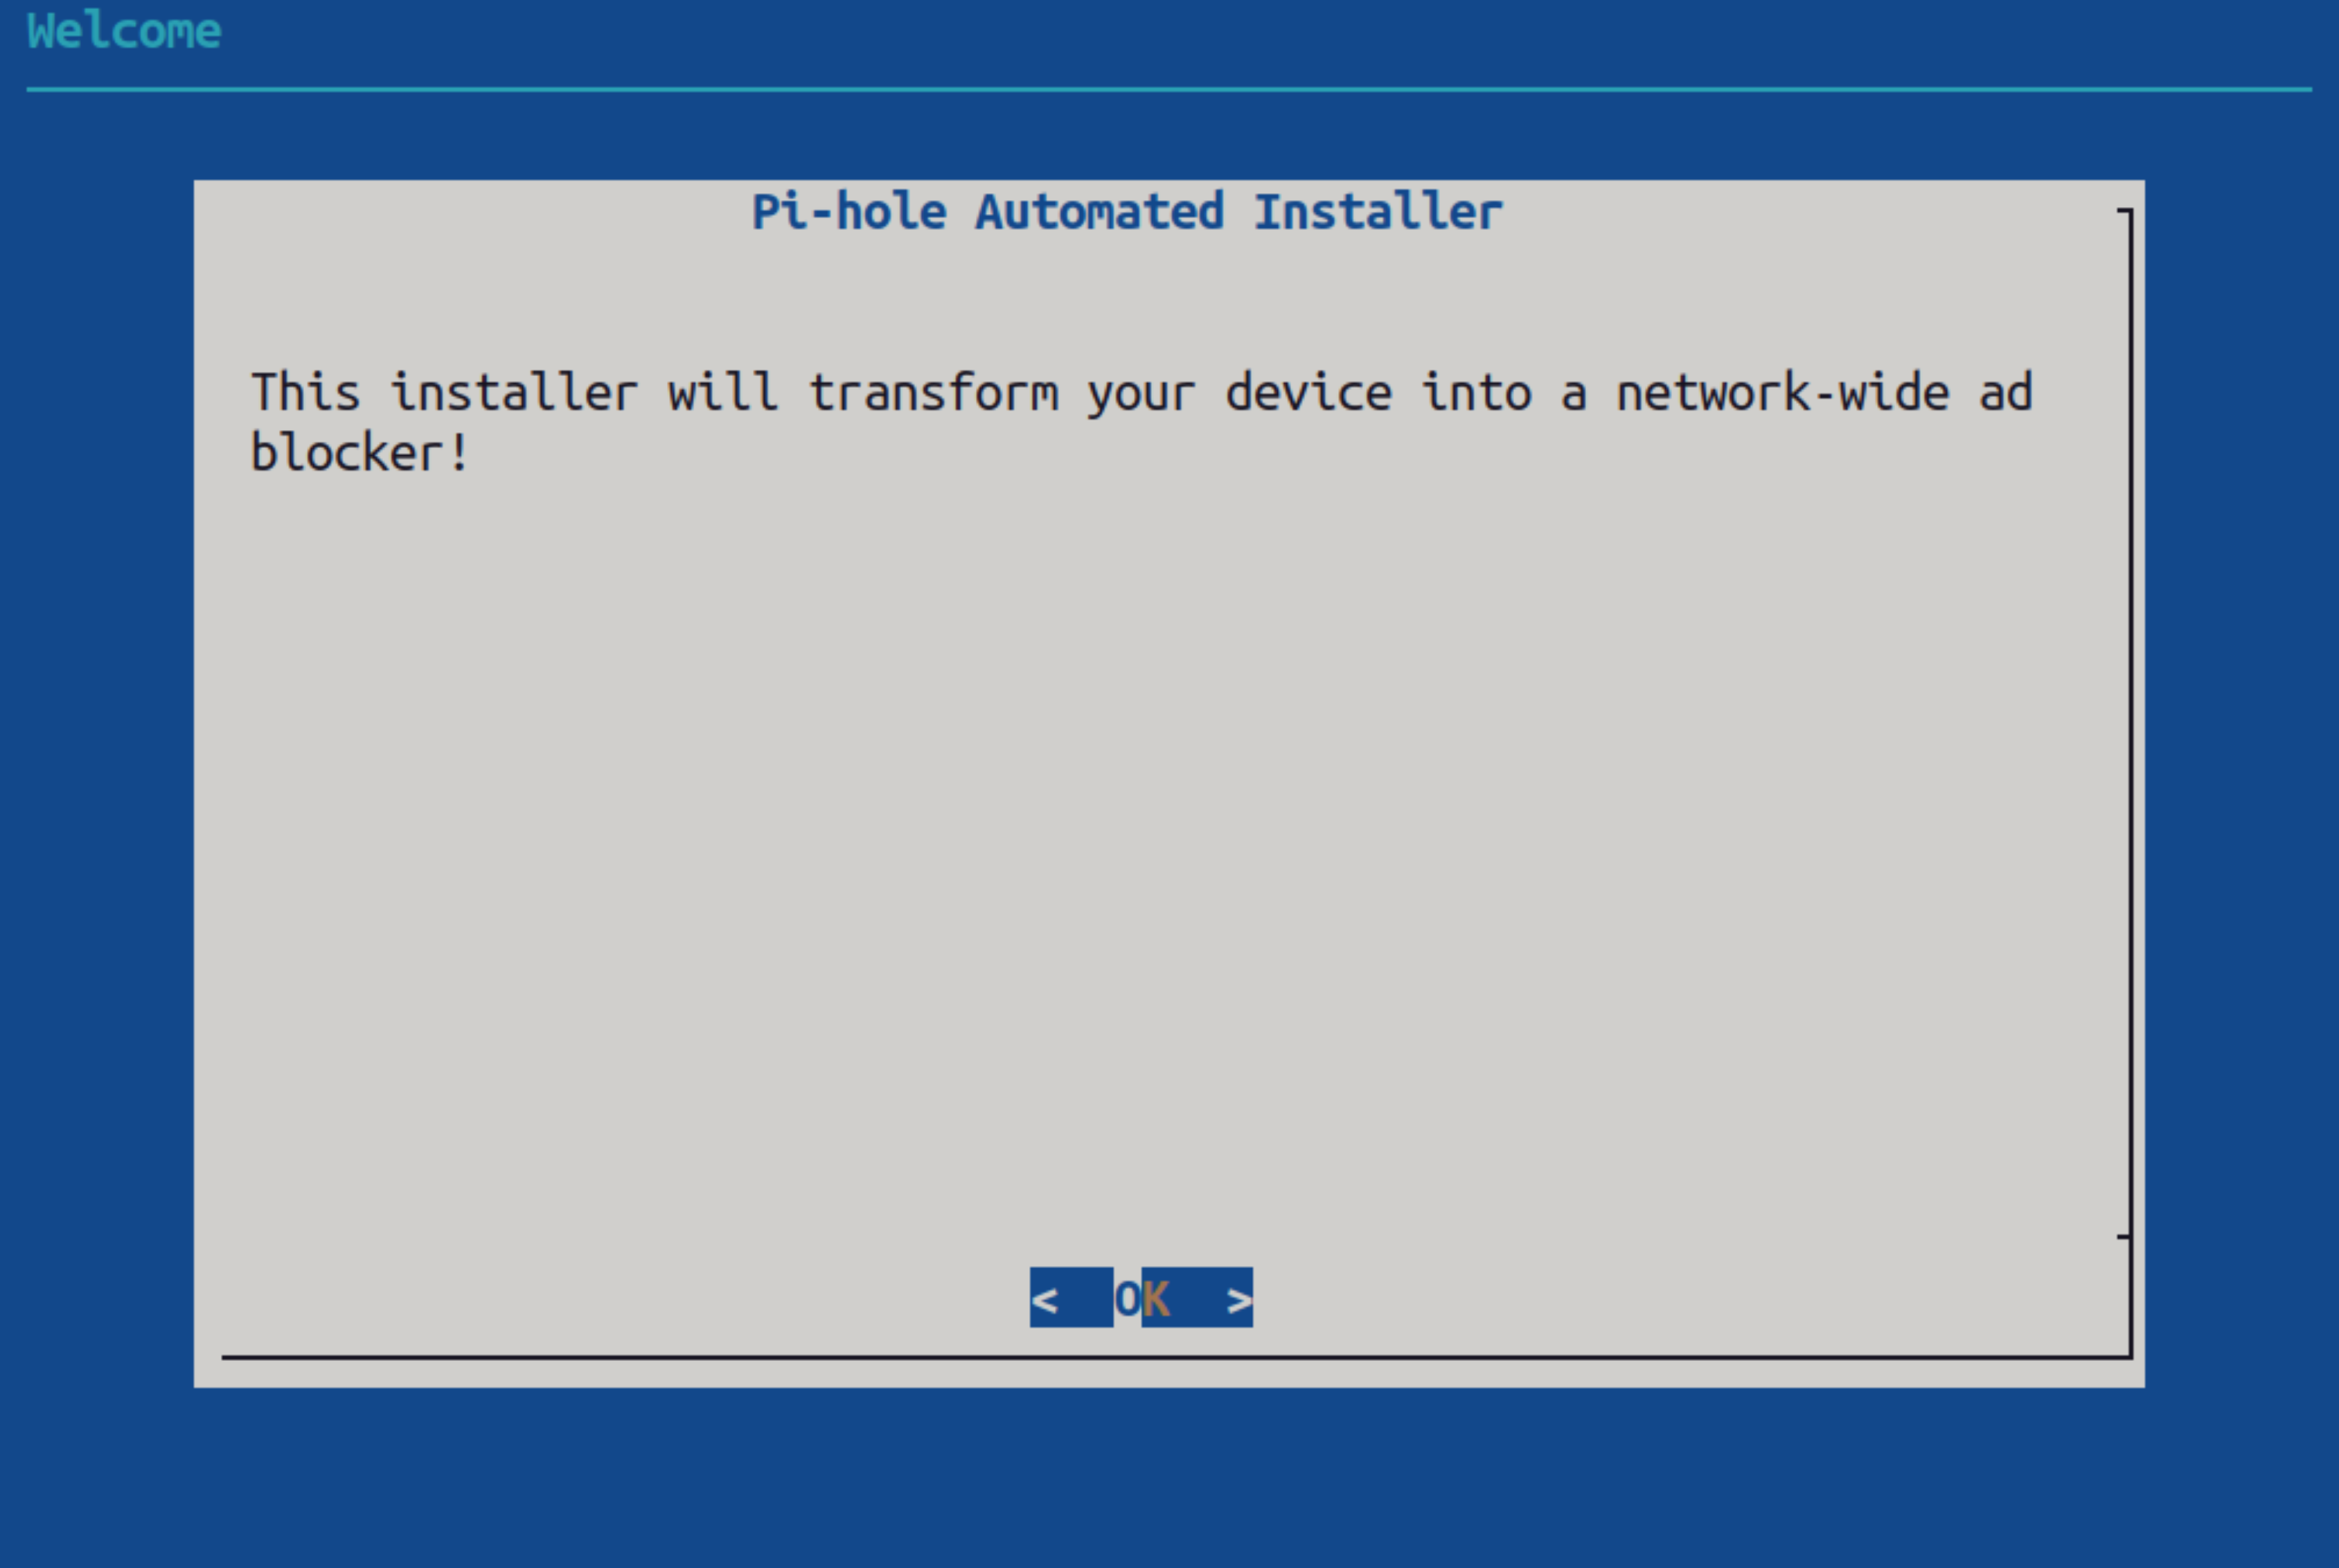 Pi-hole installer's initial screen